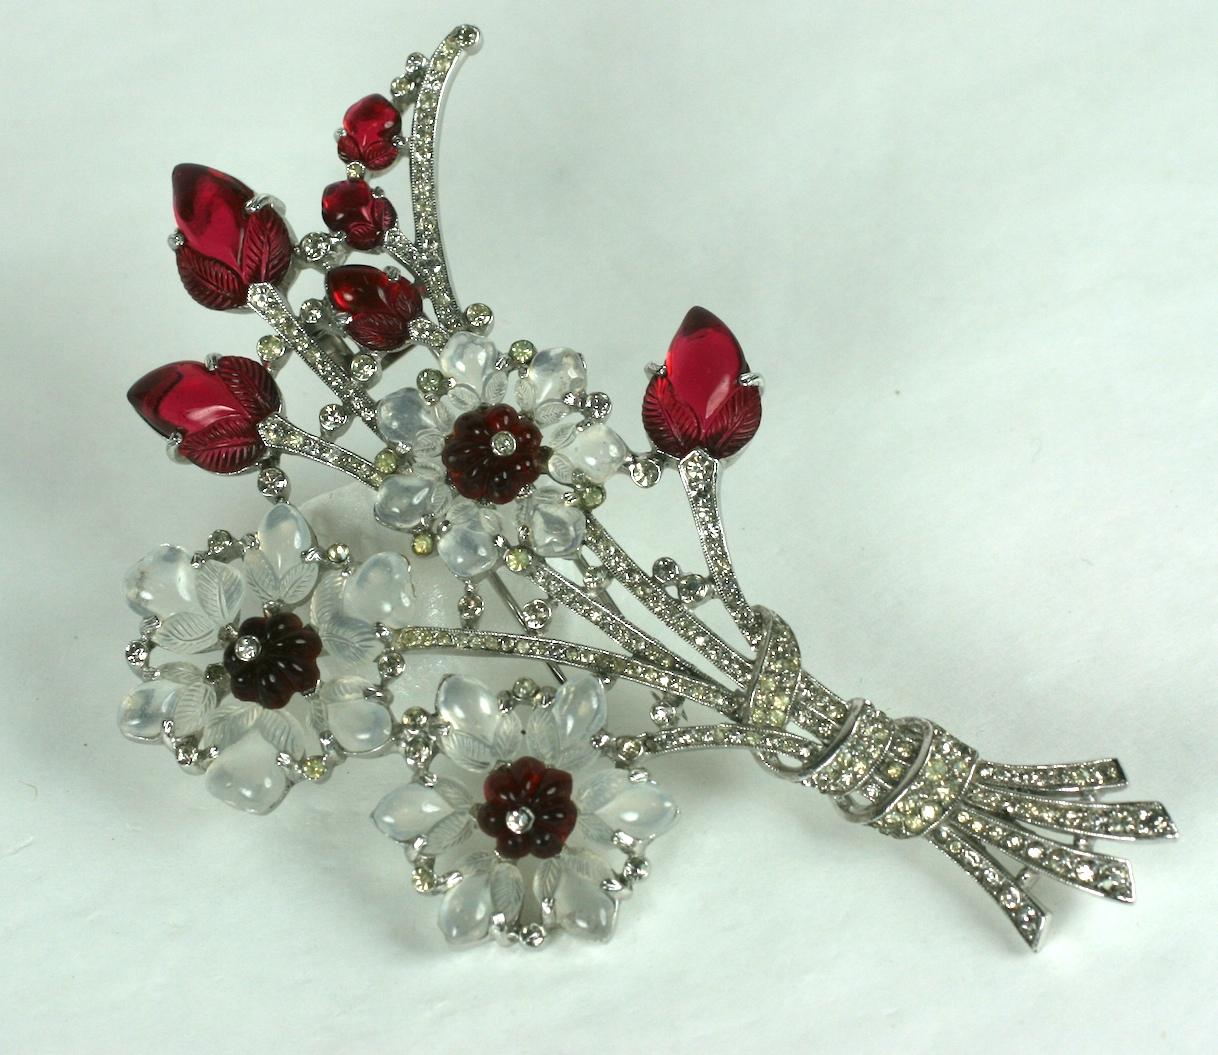 Rare, collectible and massive Trifari Alfred Philippe moonstone and ruby fruit salad giant flower bouquet clip brooch of rhodium plated base metal and crystal rhinestones. Composed of faux ruby jelly mold stones and fruit salad leaves.  The round